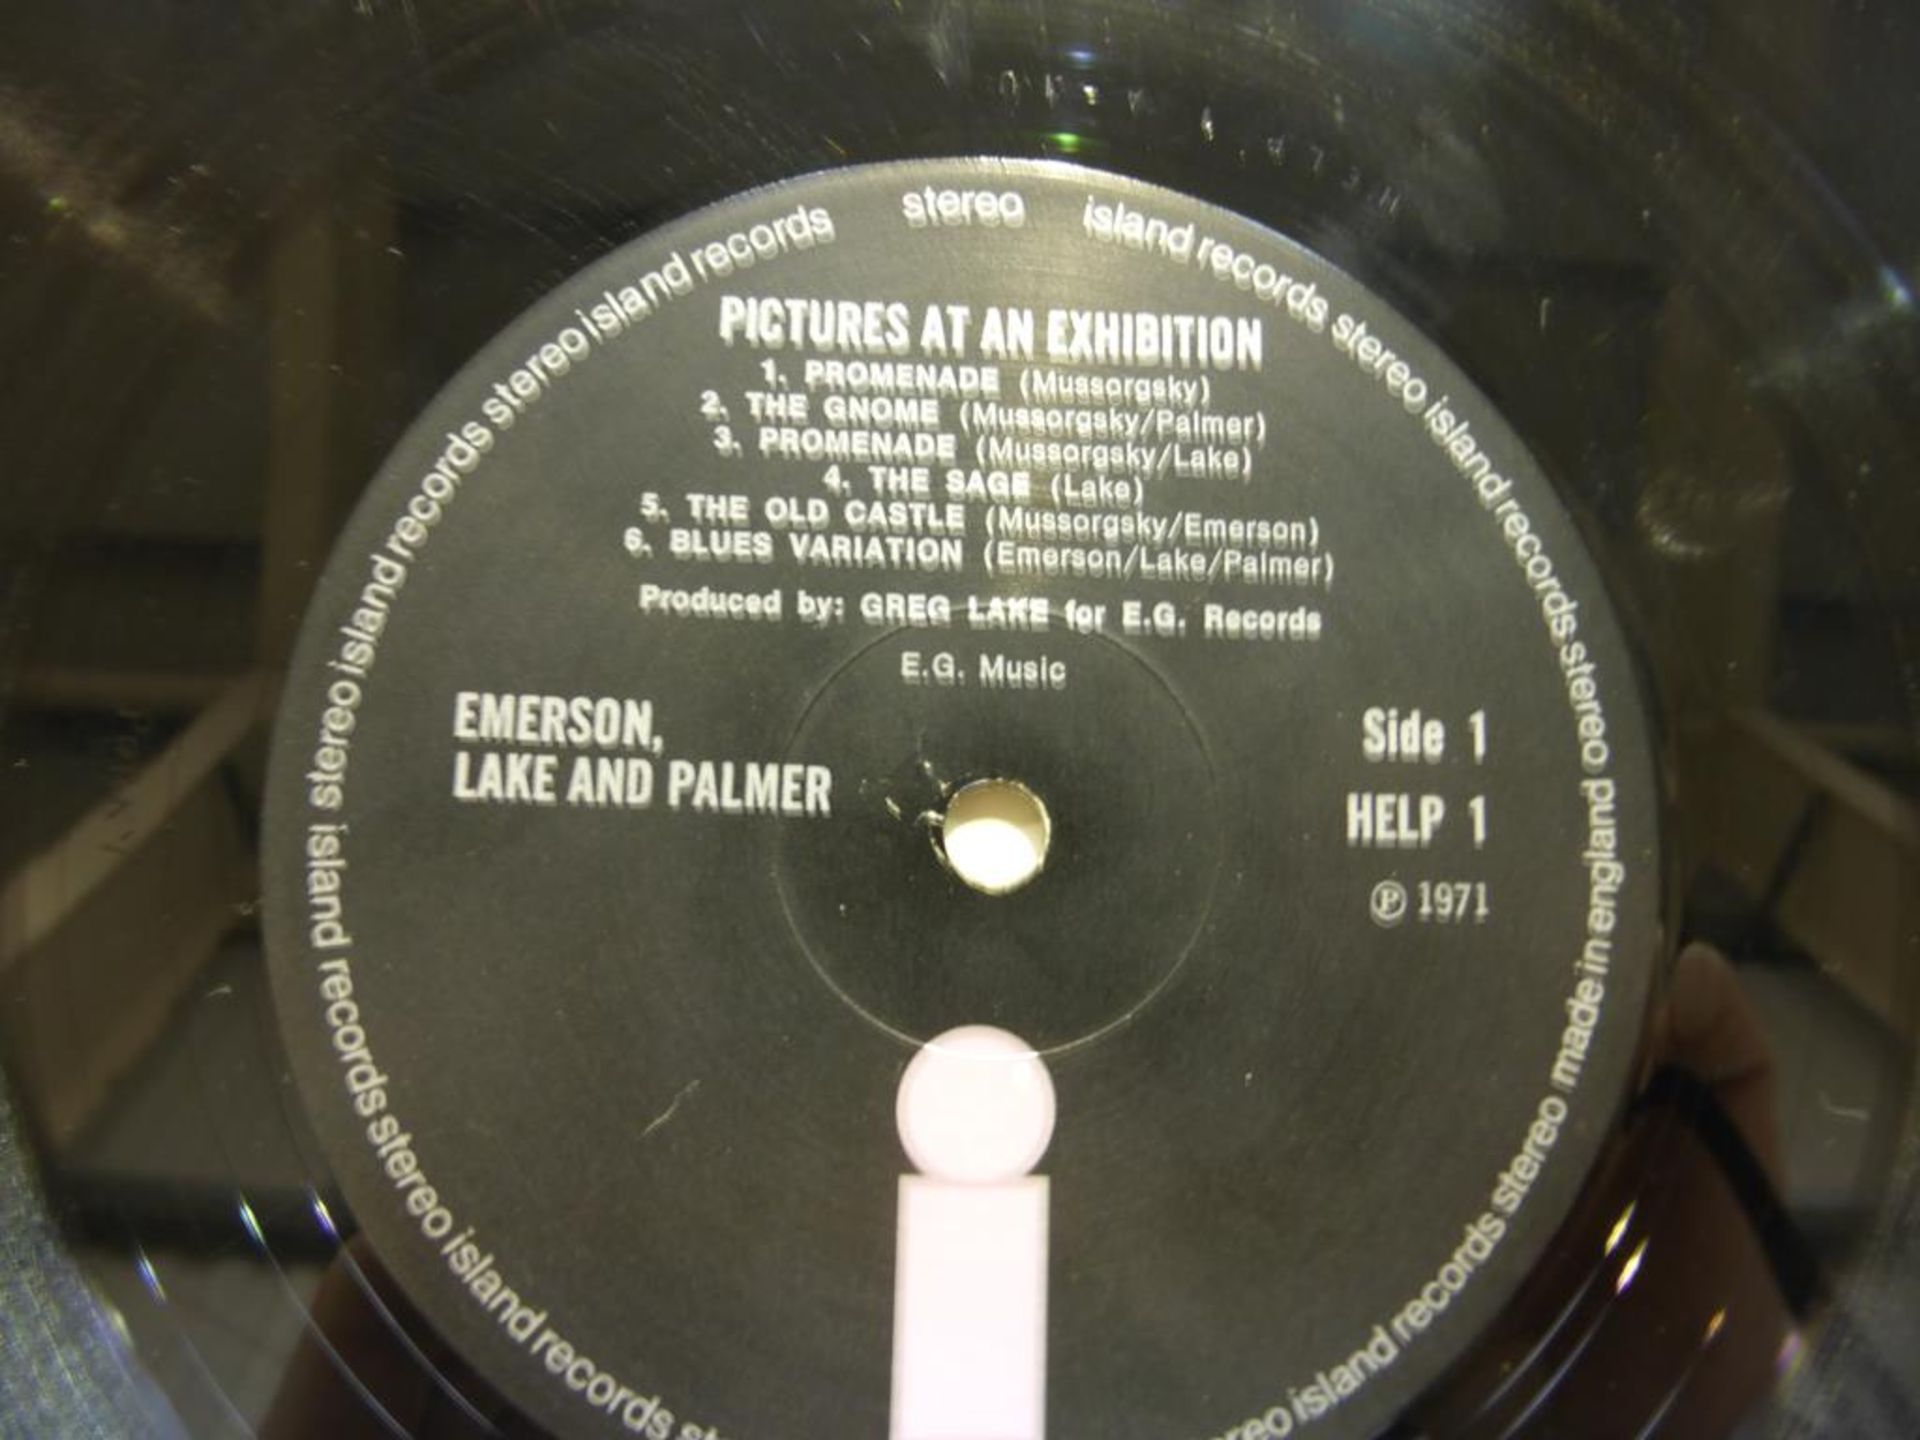 Emerson Lake & Palmer "Pictures at an Exhibition" - Image 6 of 6